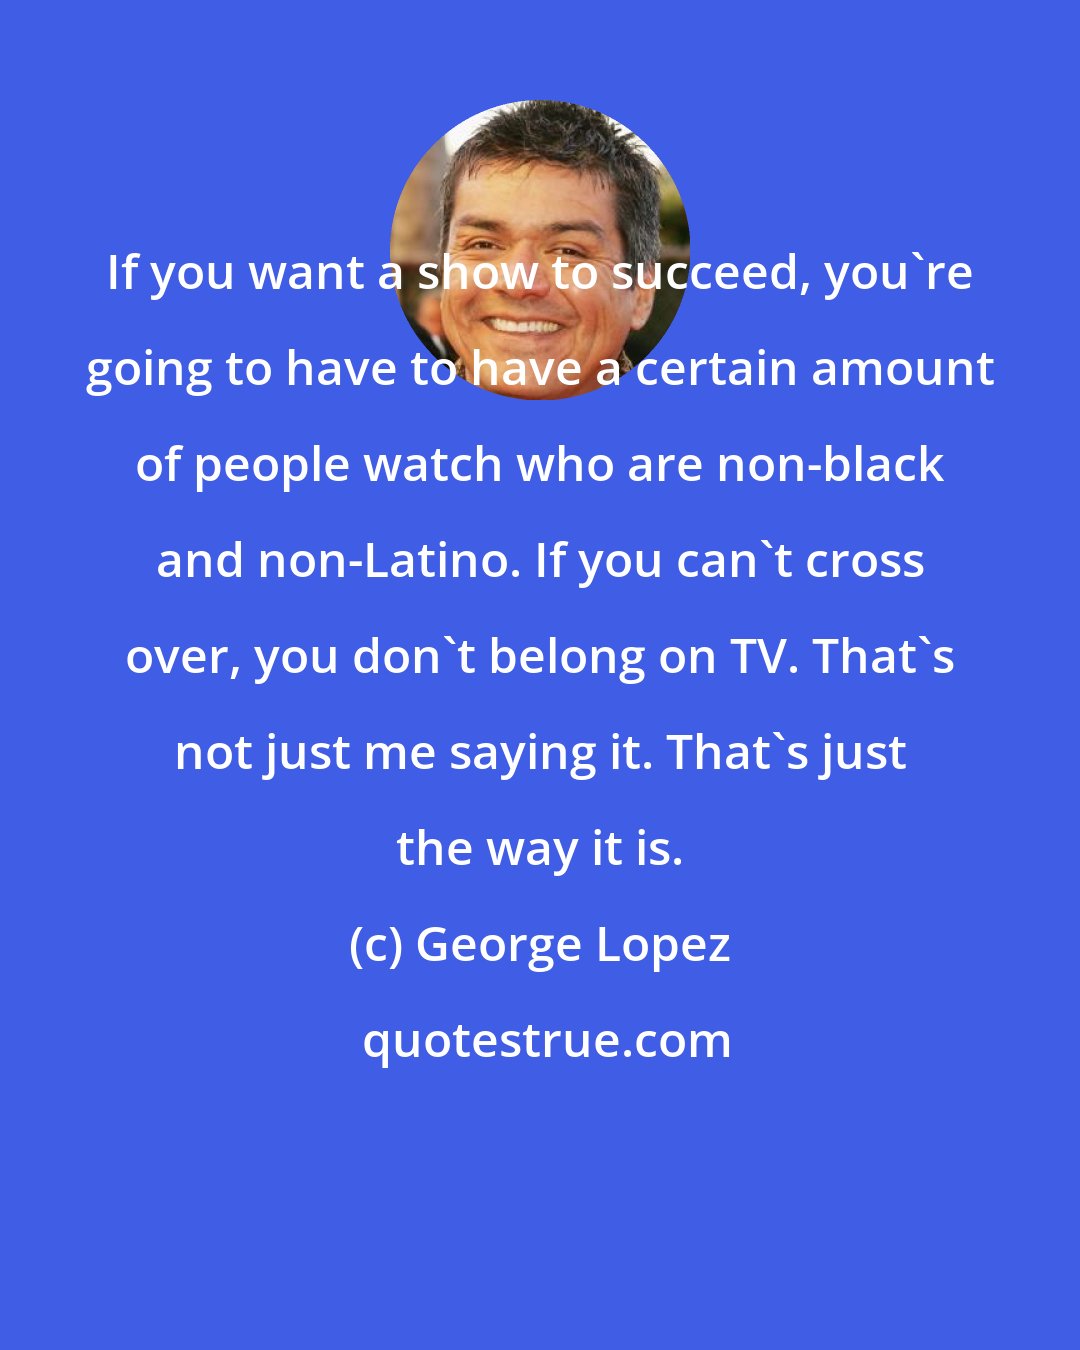 George Lopez: If you want a show to succeed, you're going to have to have a certain amount of people watch who are non-black and non-Latino. If you can't cross over, you don't belong on TV. That's not just me saying it. That's just the way it is.